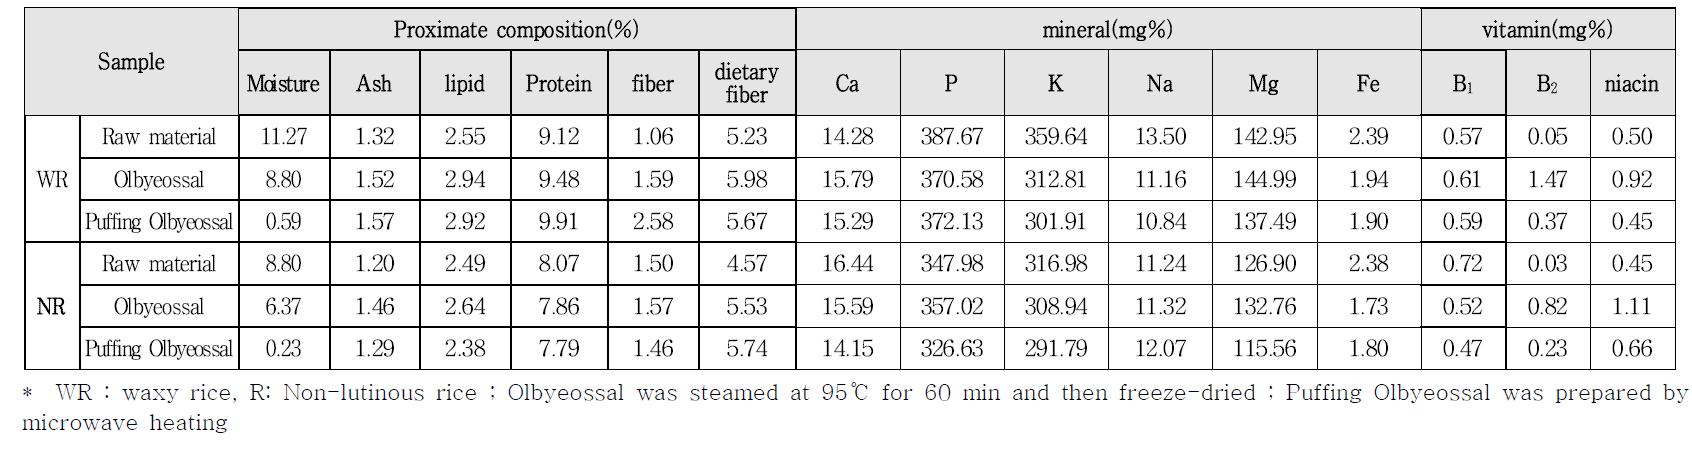 Comparison on proximate composition, mineral and vitamin contents of rough rice, Olbyeossal and Puffing Olbyeossal by microwave heating